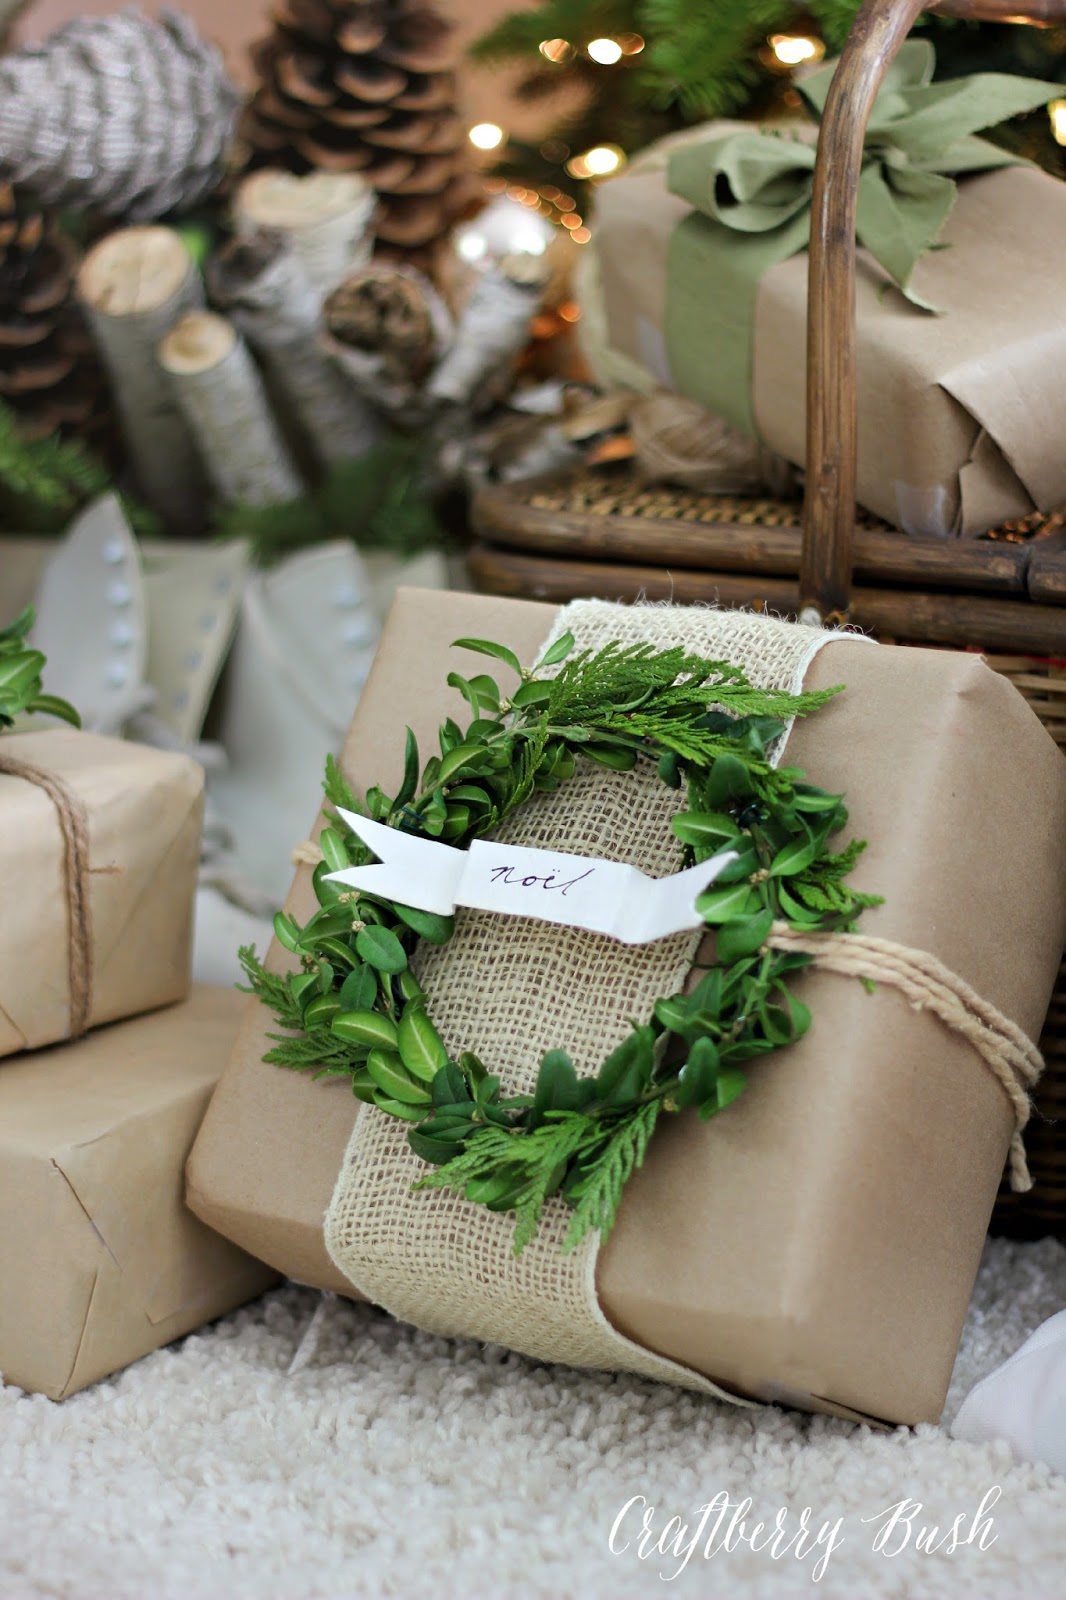 Package wrapped in kraft paper and burlap with a boxwood wreath gift tag....beautiful and neutral wrapping from Craftberry Bush | Friday Christmas Favorites at www.andersonandgrant.com